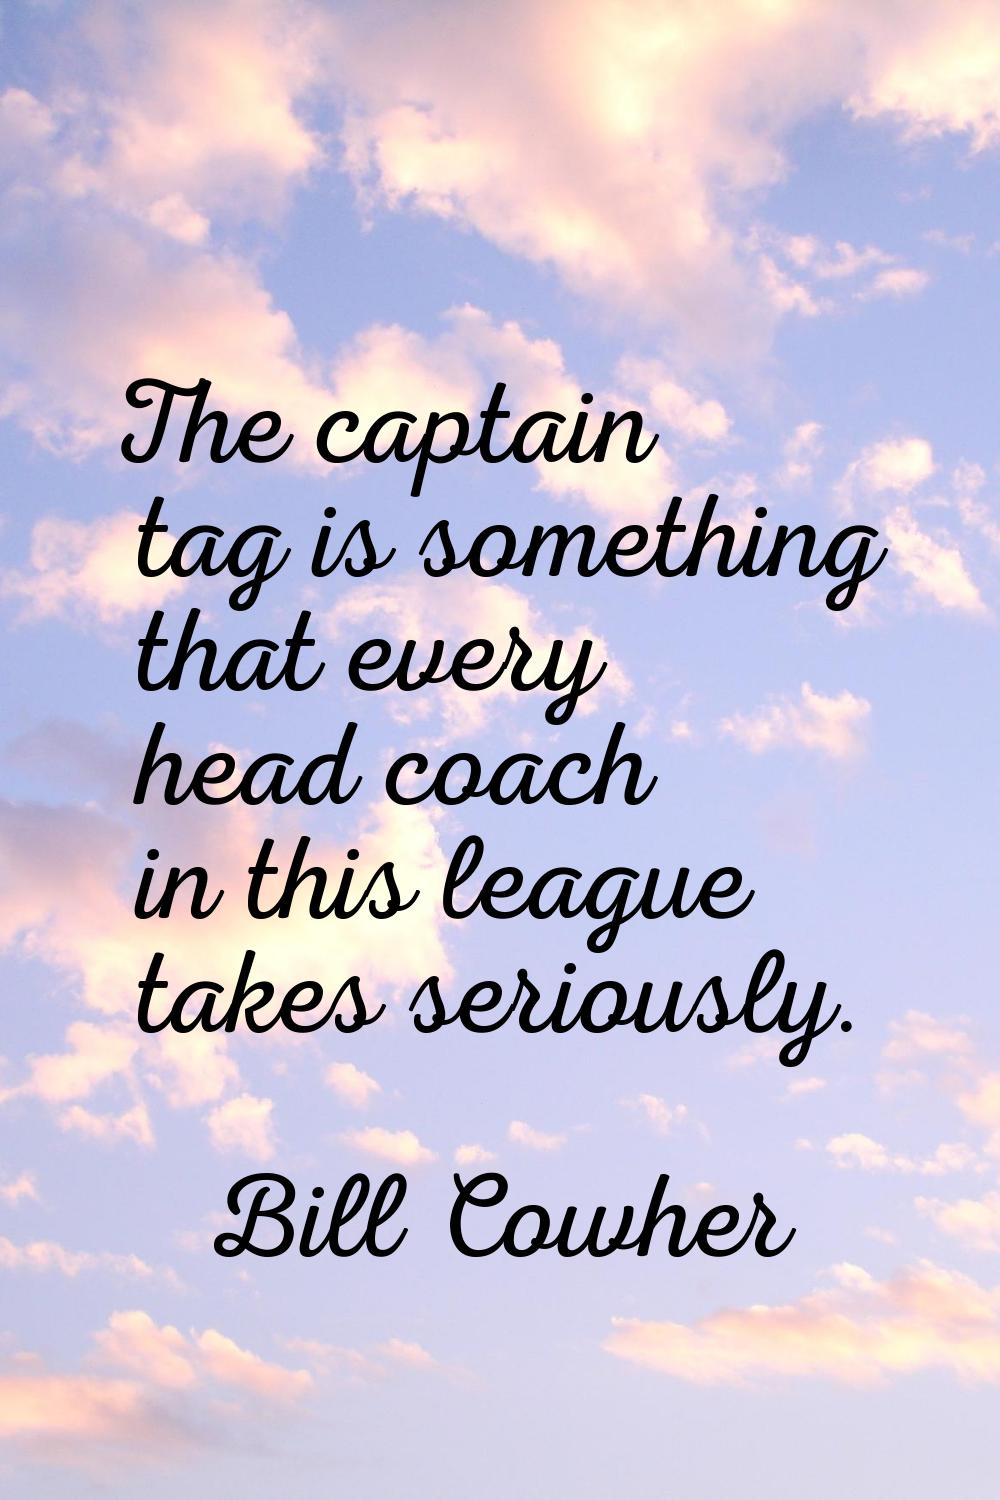 The captain tag is something that every head coach in this league takes seriously.